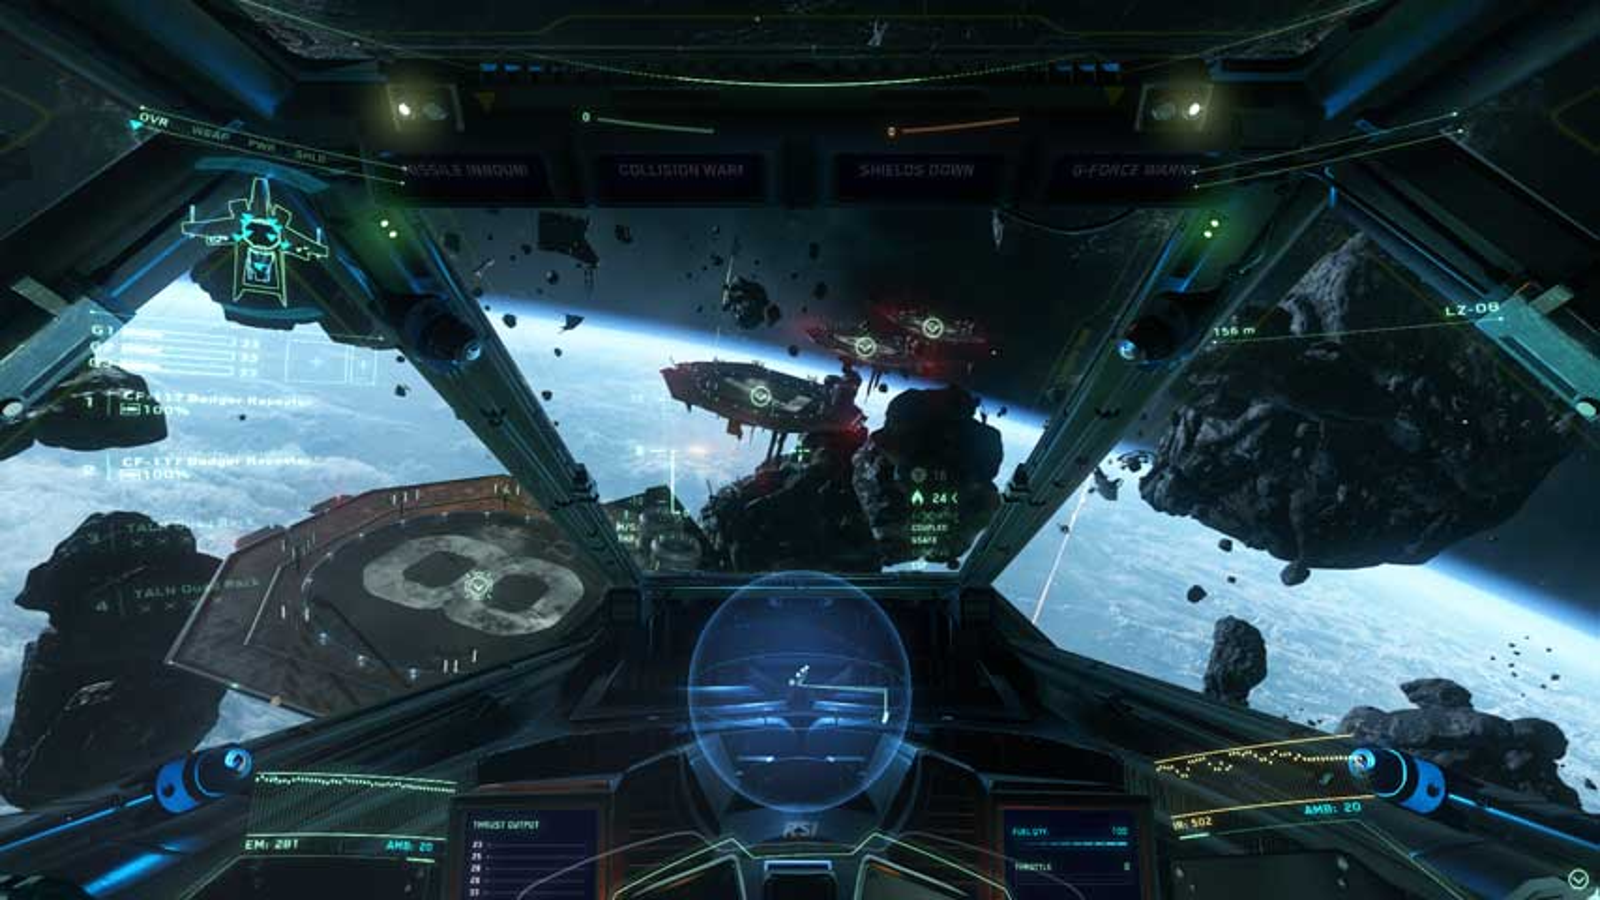 Star Citizen Squadron 42 Gameplay Footage Leaks, Showing Off the Game's  Single-Player Mode